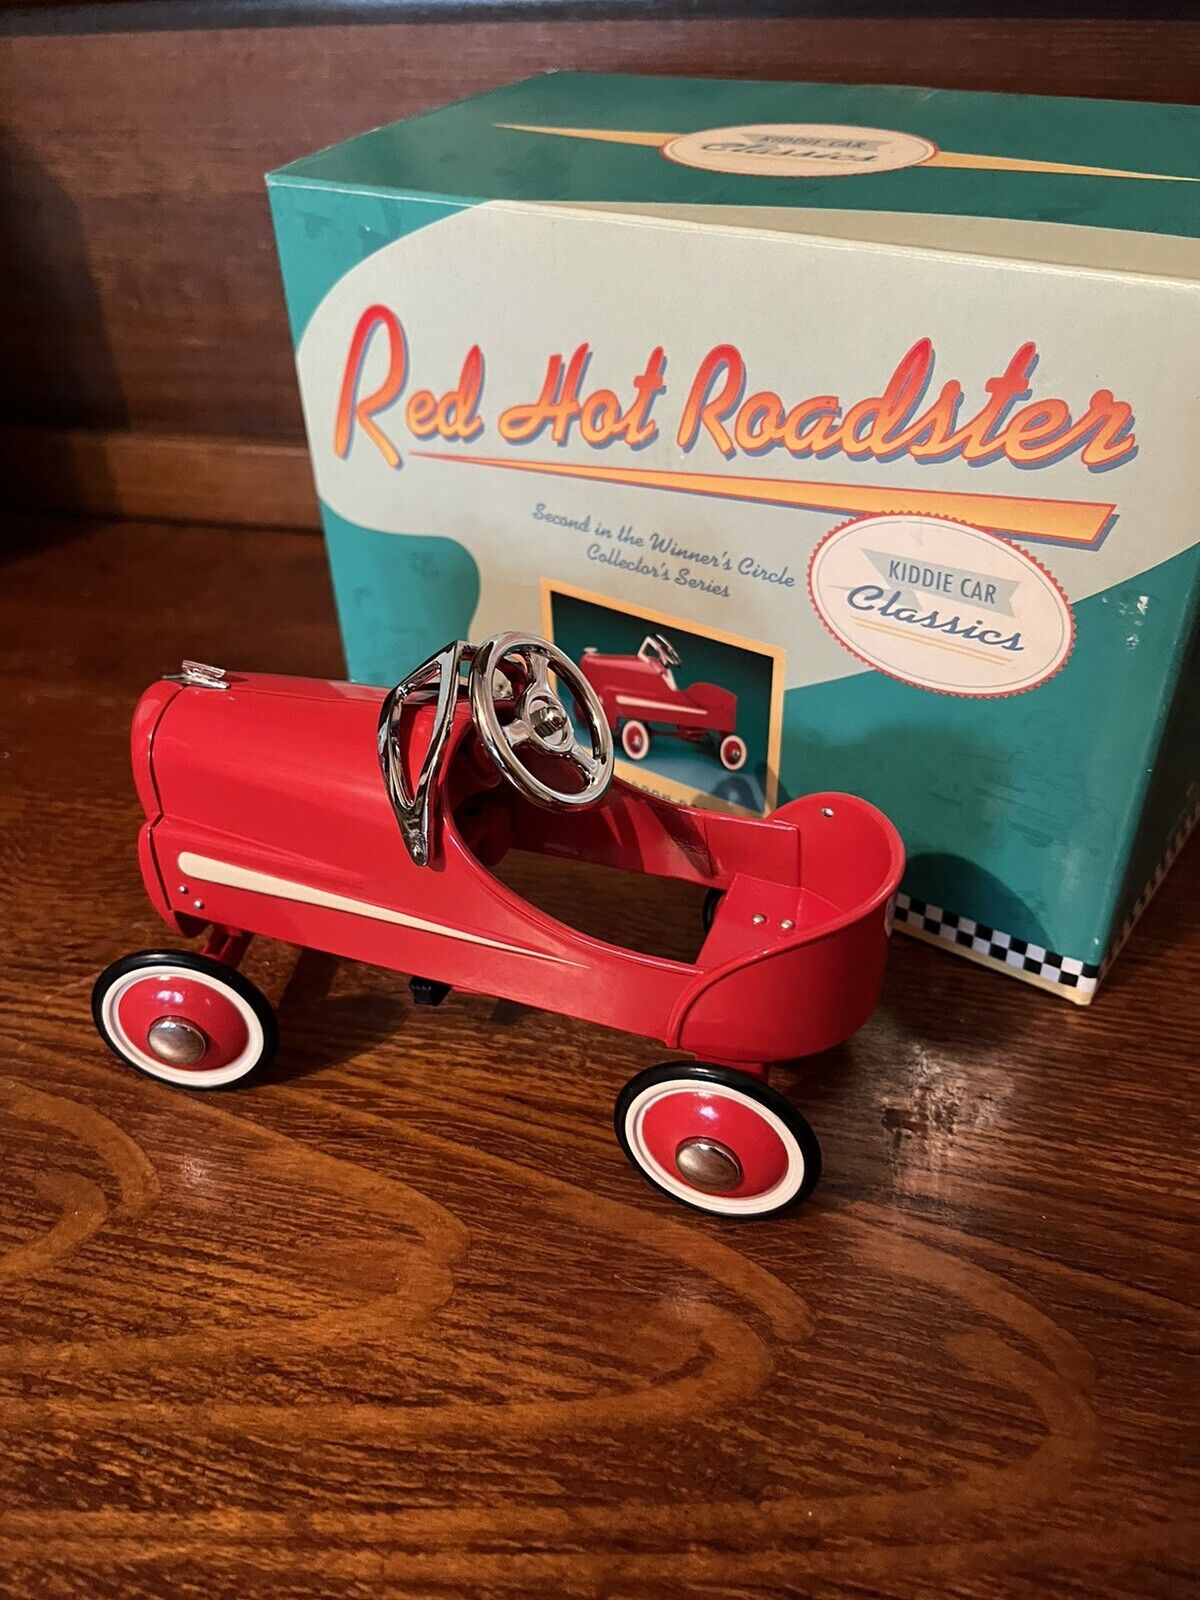 Hallmark Kiddie Car Classics Red Hot Roadster 1940 Gendron. NEW IN BOX